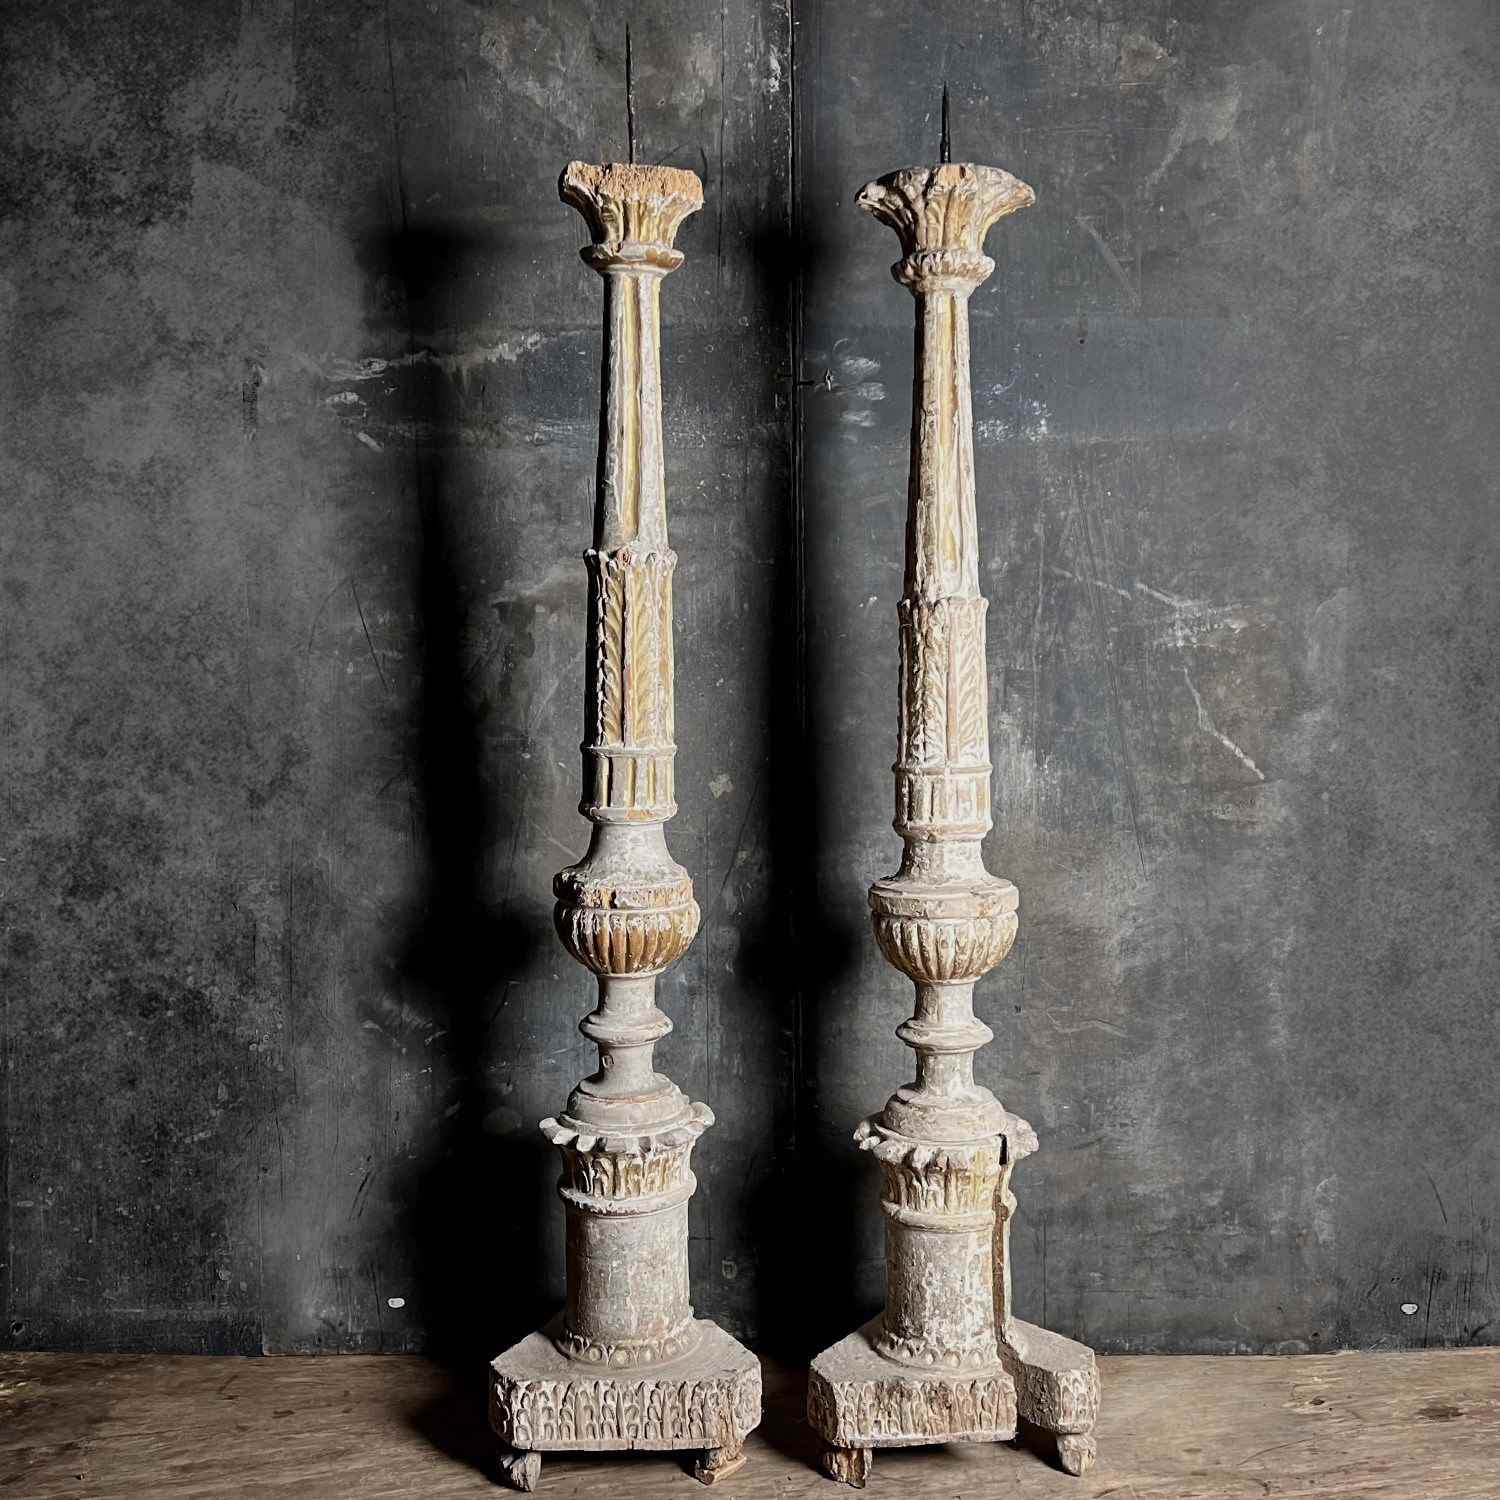 Pair Of Tall Carved Painted Italian Altar Candlesticks Late 17Th/Early 18Th  C. - Decorative Collective